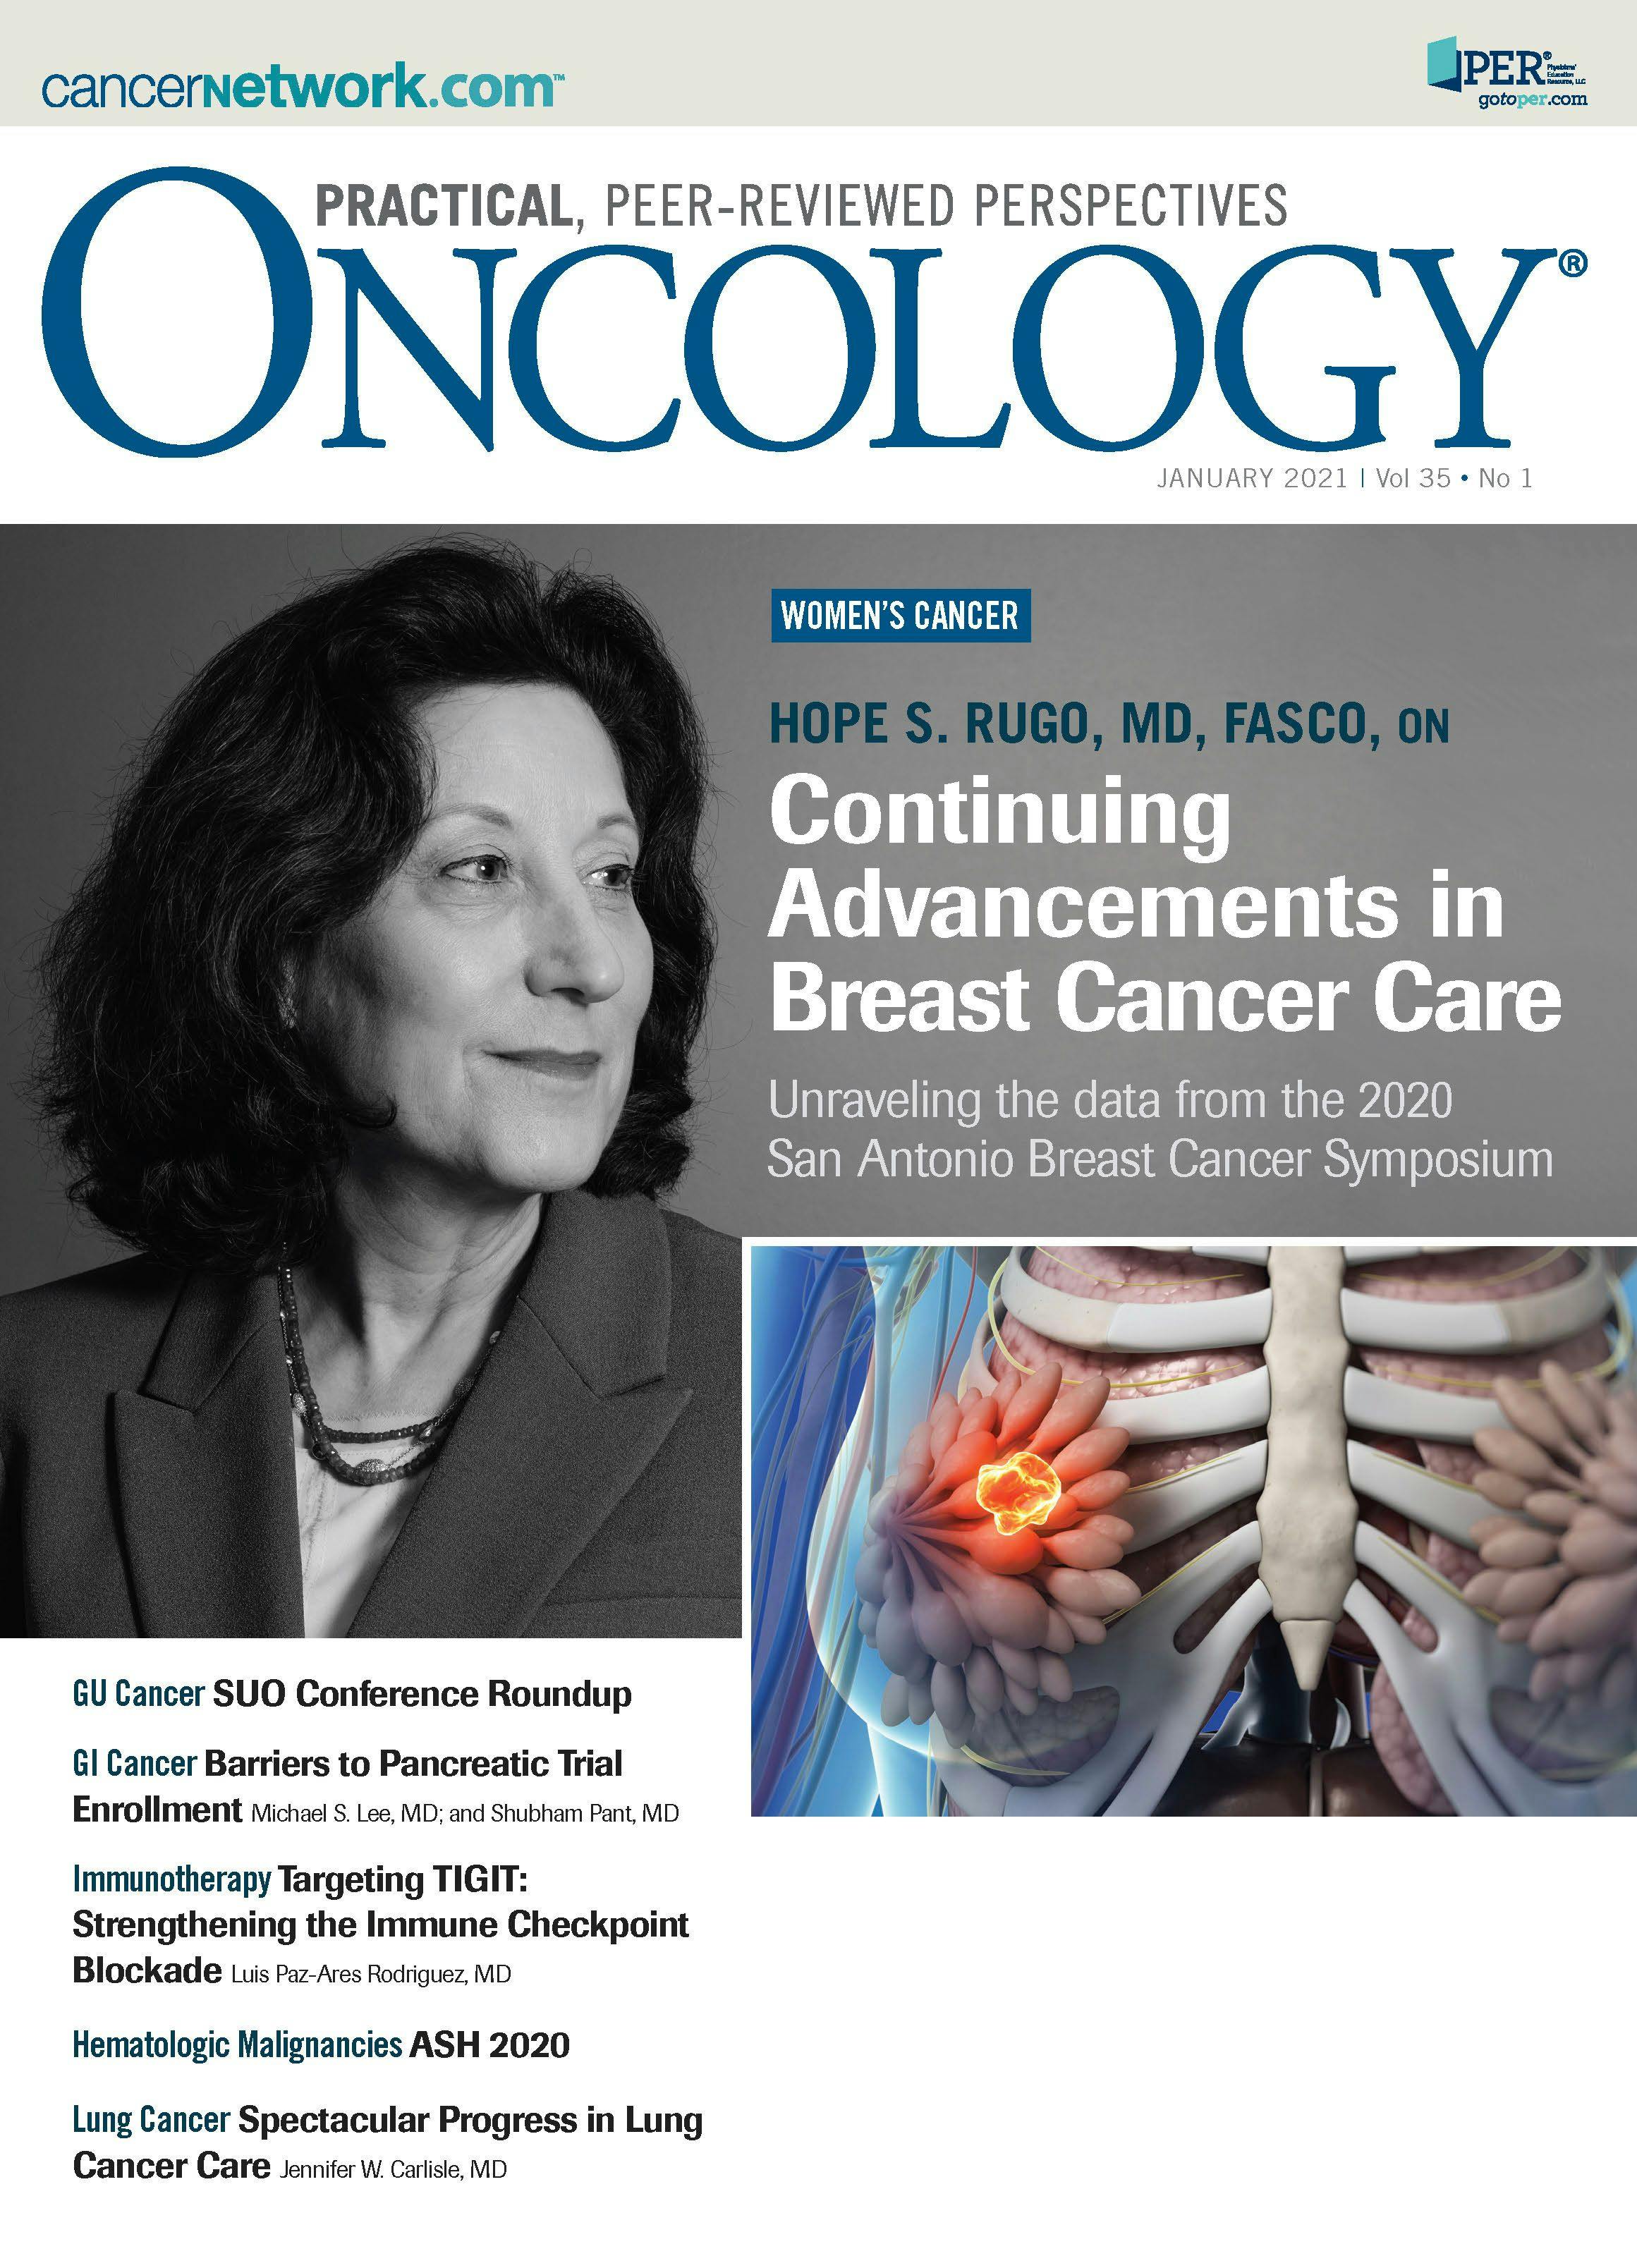 ONCOLOGY Vol 35 Issue 1